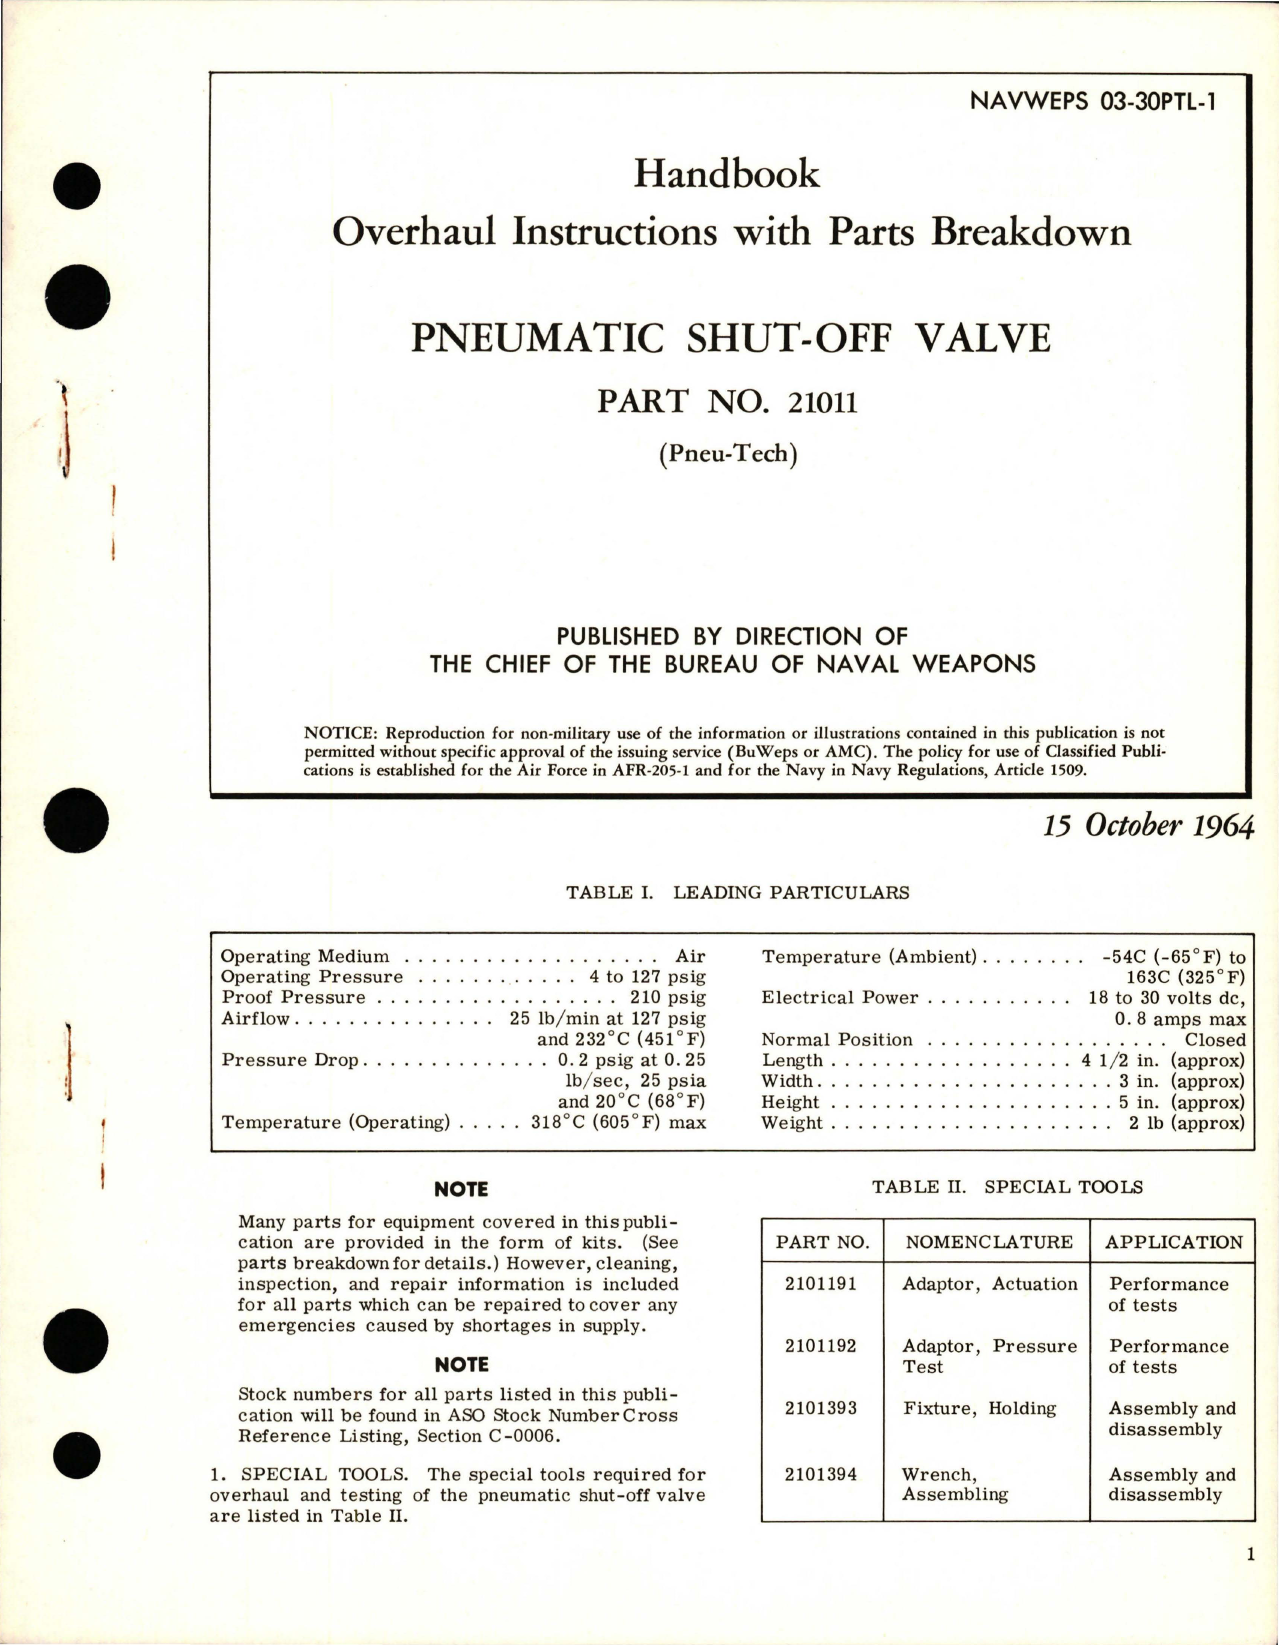 Sample page 1 from AirCorps Library document: Overhaul Instructions with Parts Breakdown for Pneumatic Shut-Off Valve - Part 21011